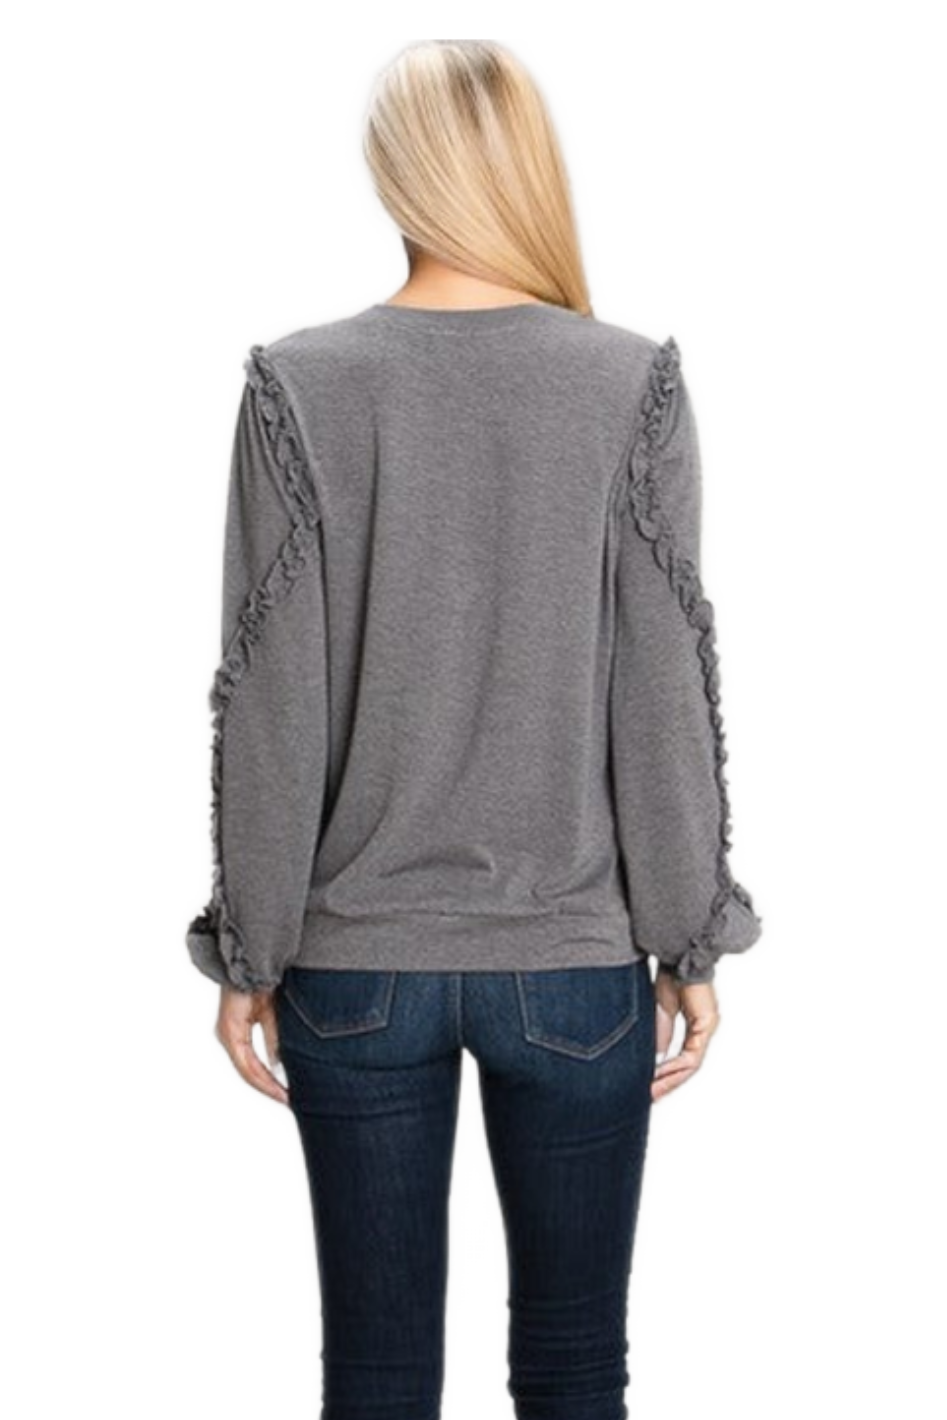 Whisper Soft Jersey Pullover - Expressive Collective CO.